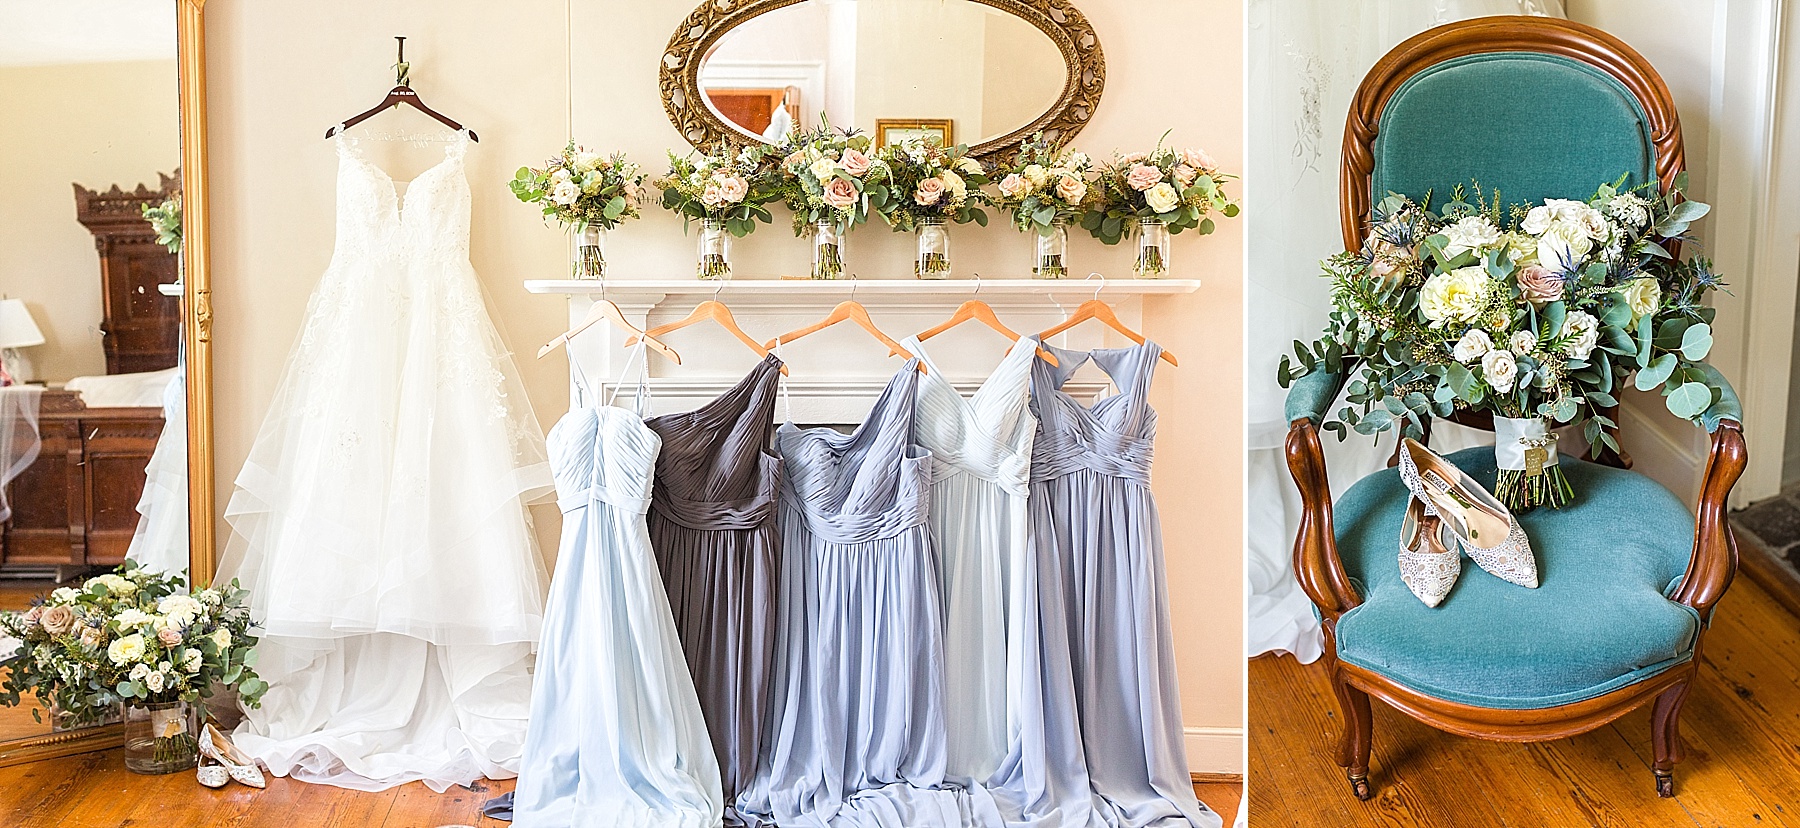 bridesmaid gowns in shades of blue photographed by Alexandra Mandato Photography